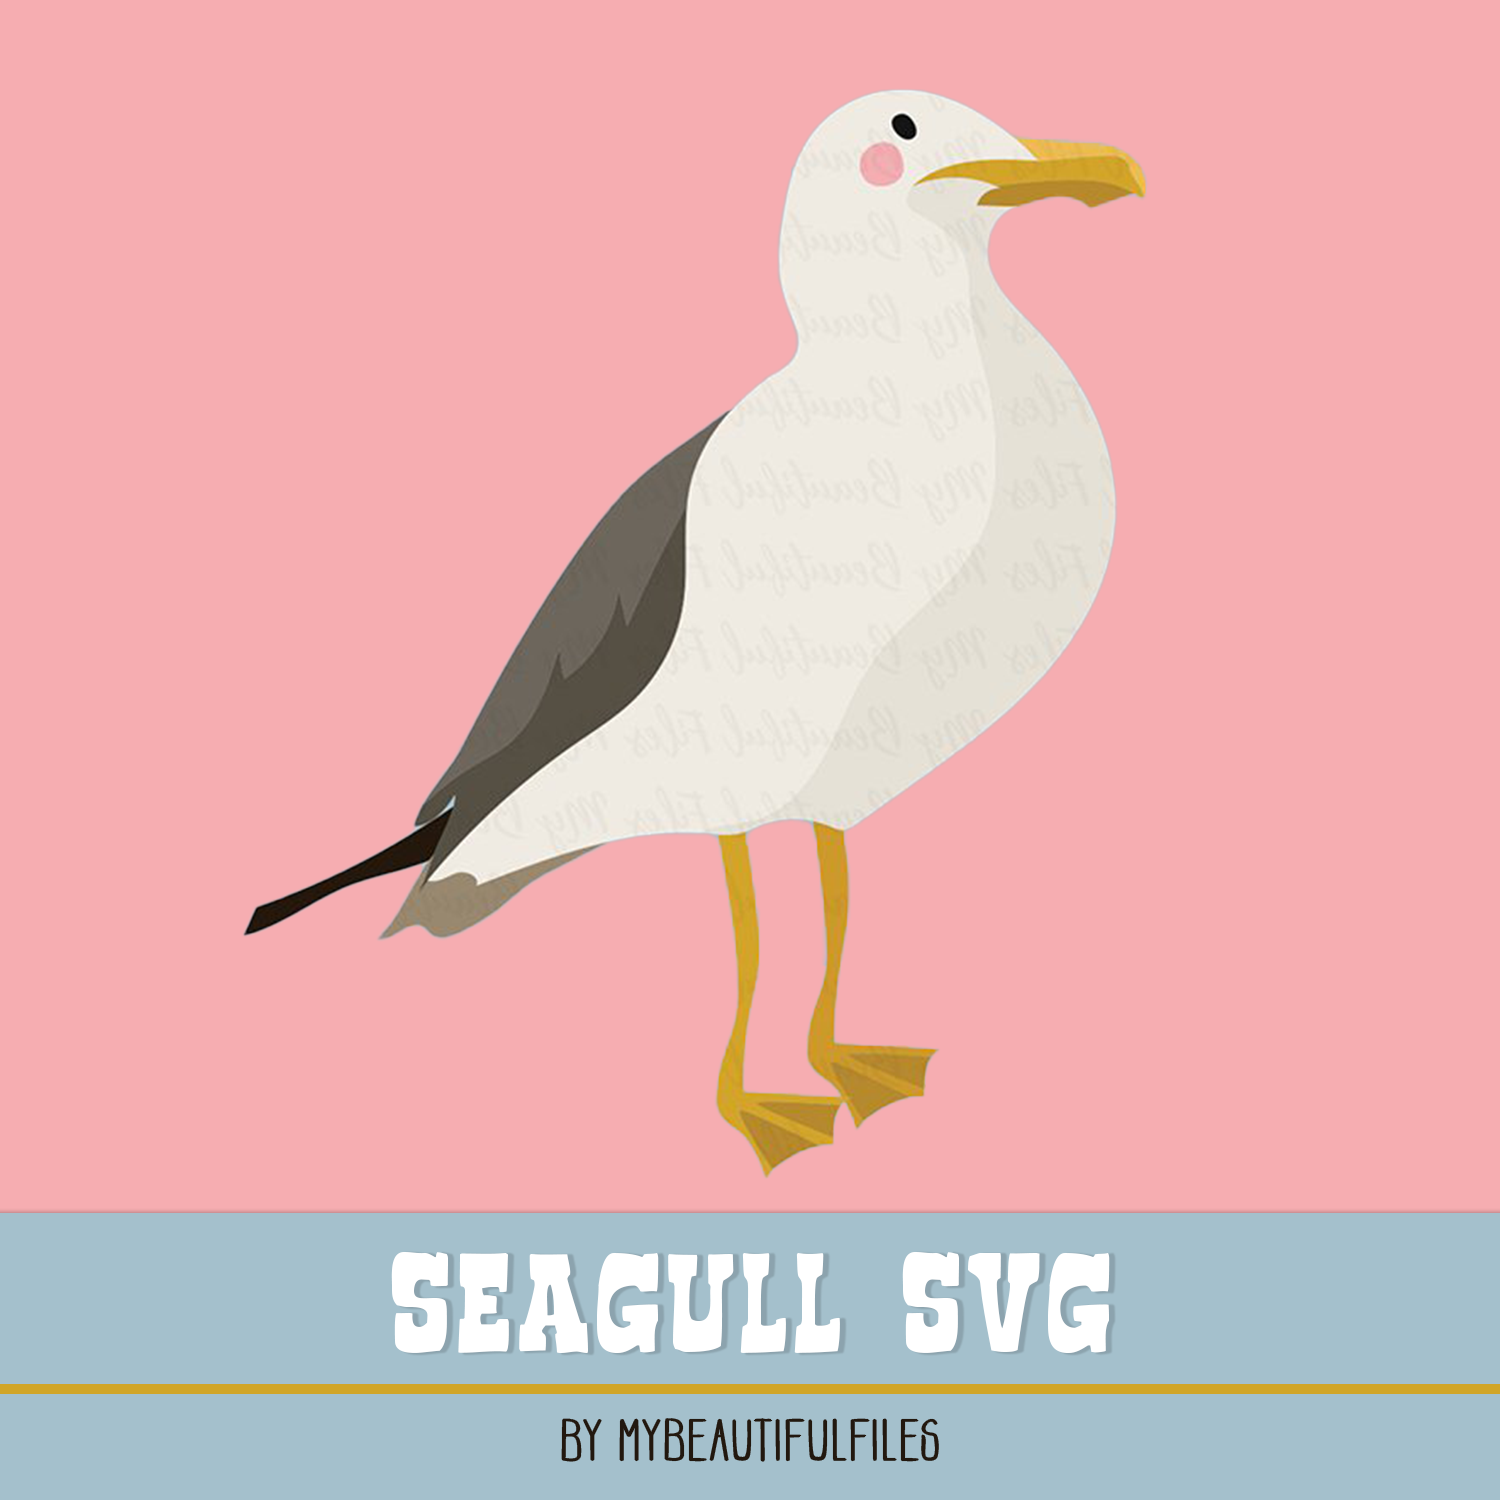 Seagull SVG - Cute Pirate SVG, EPS, PNG and JPG cover.